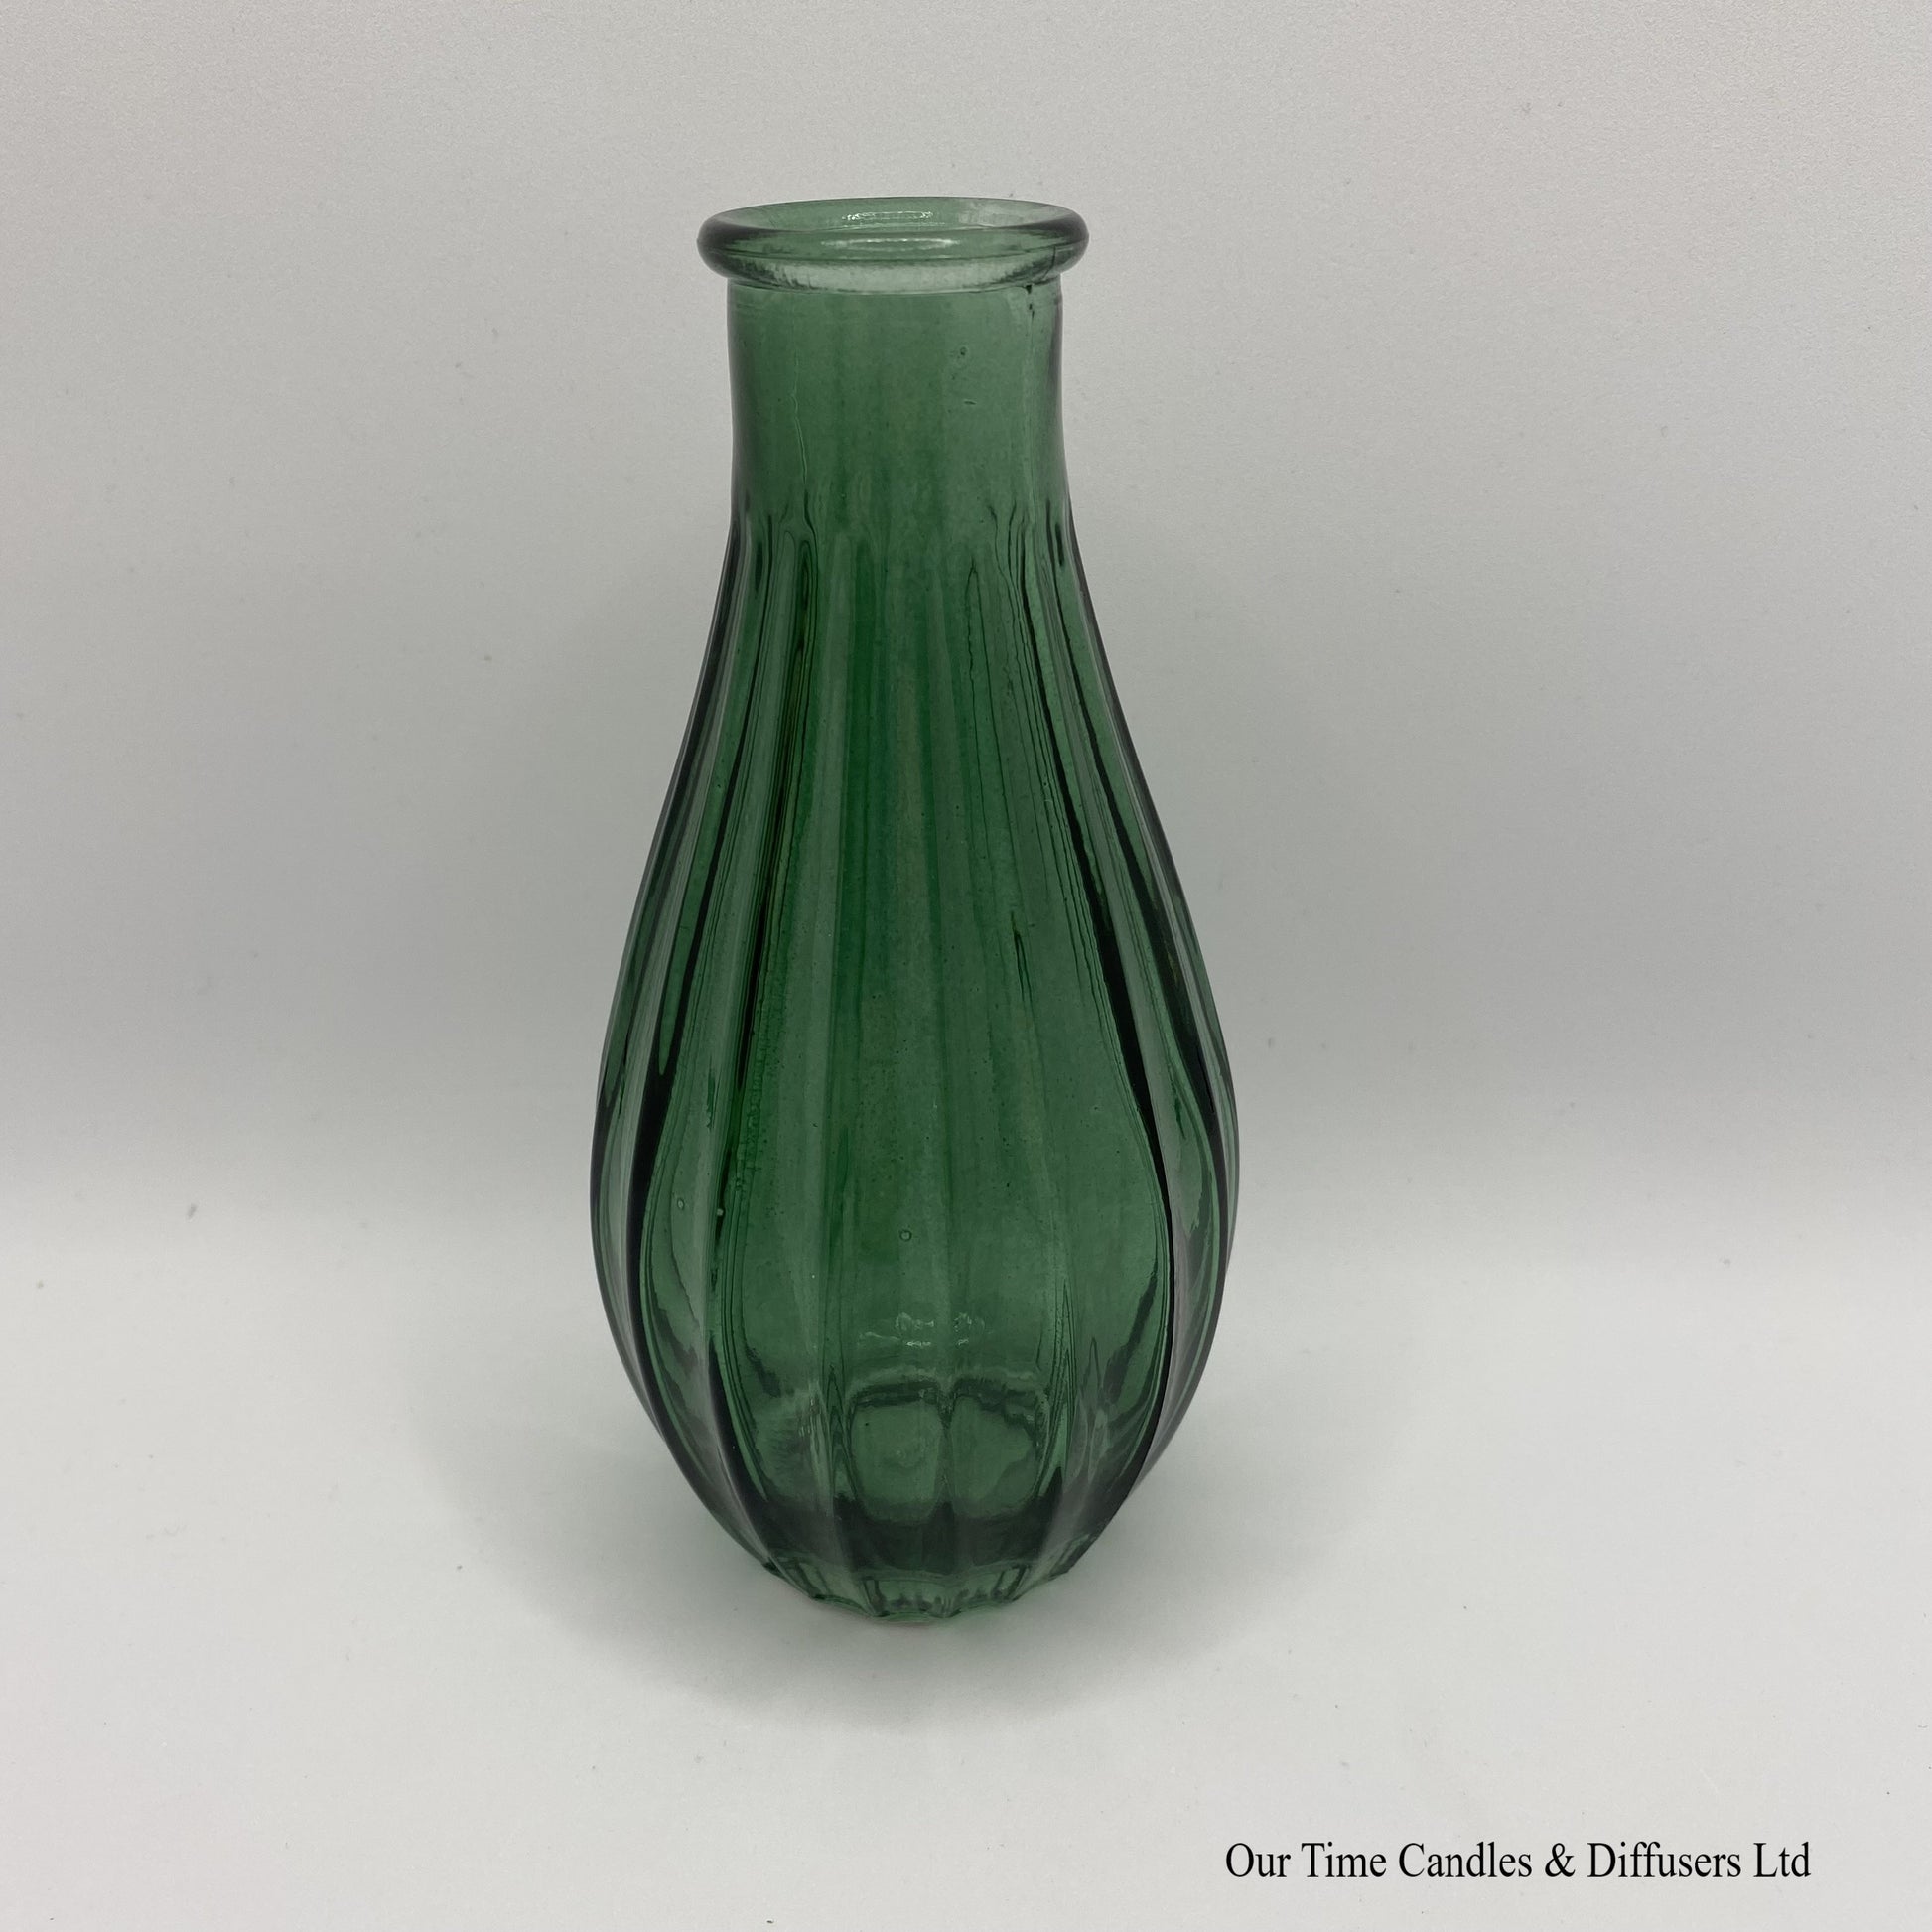 Fluted diffuser vase in green